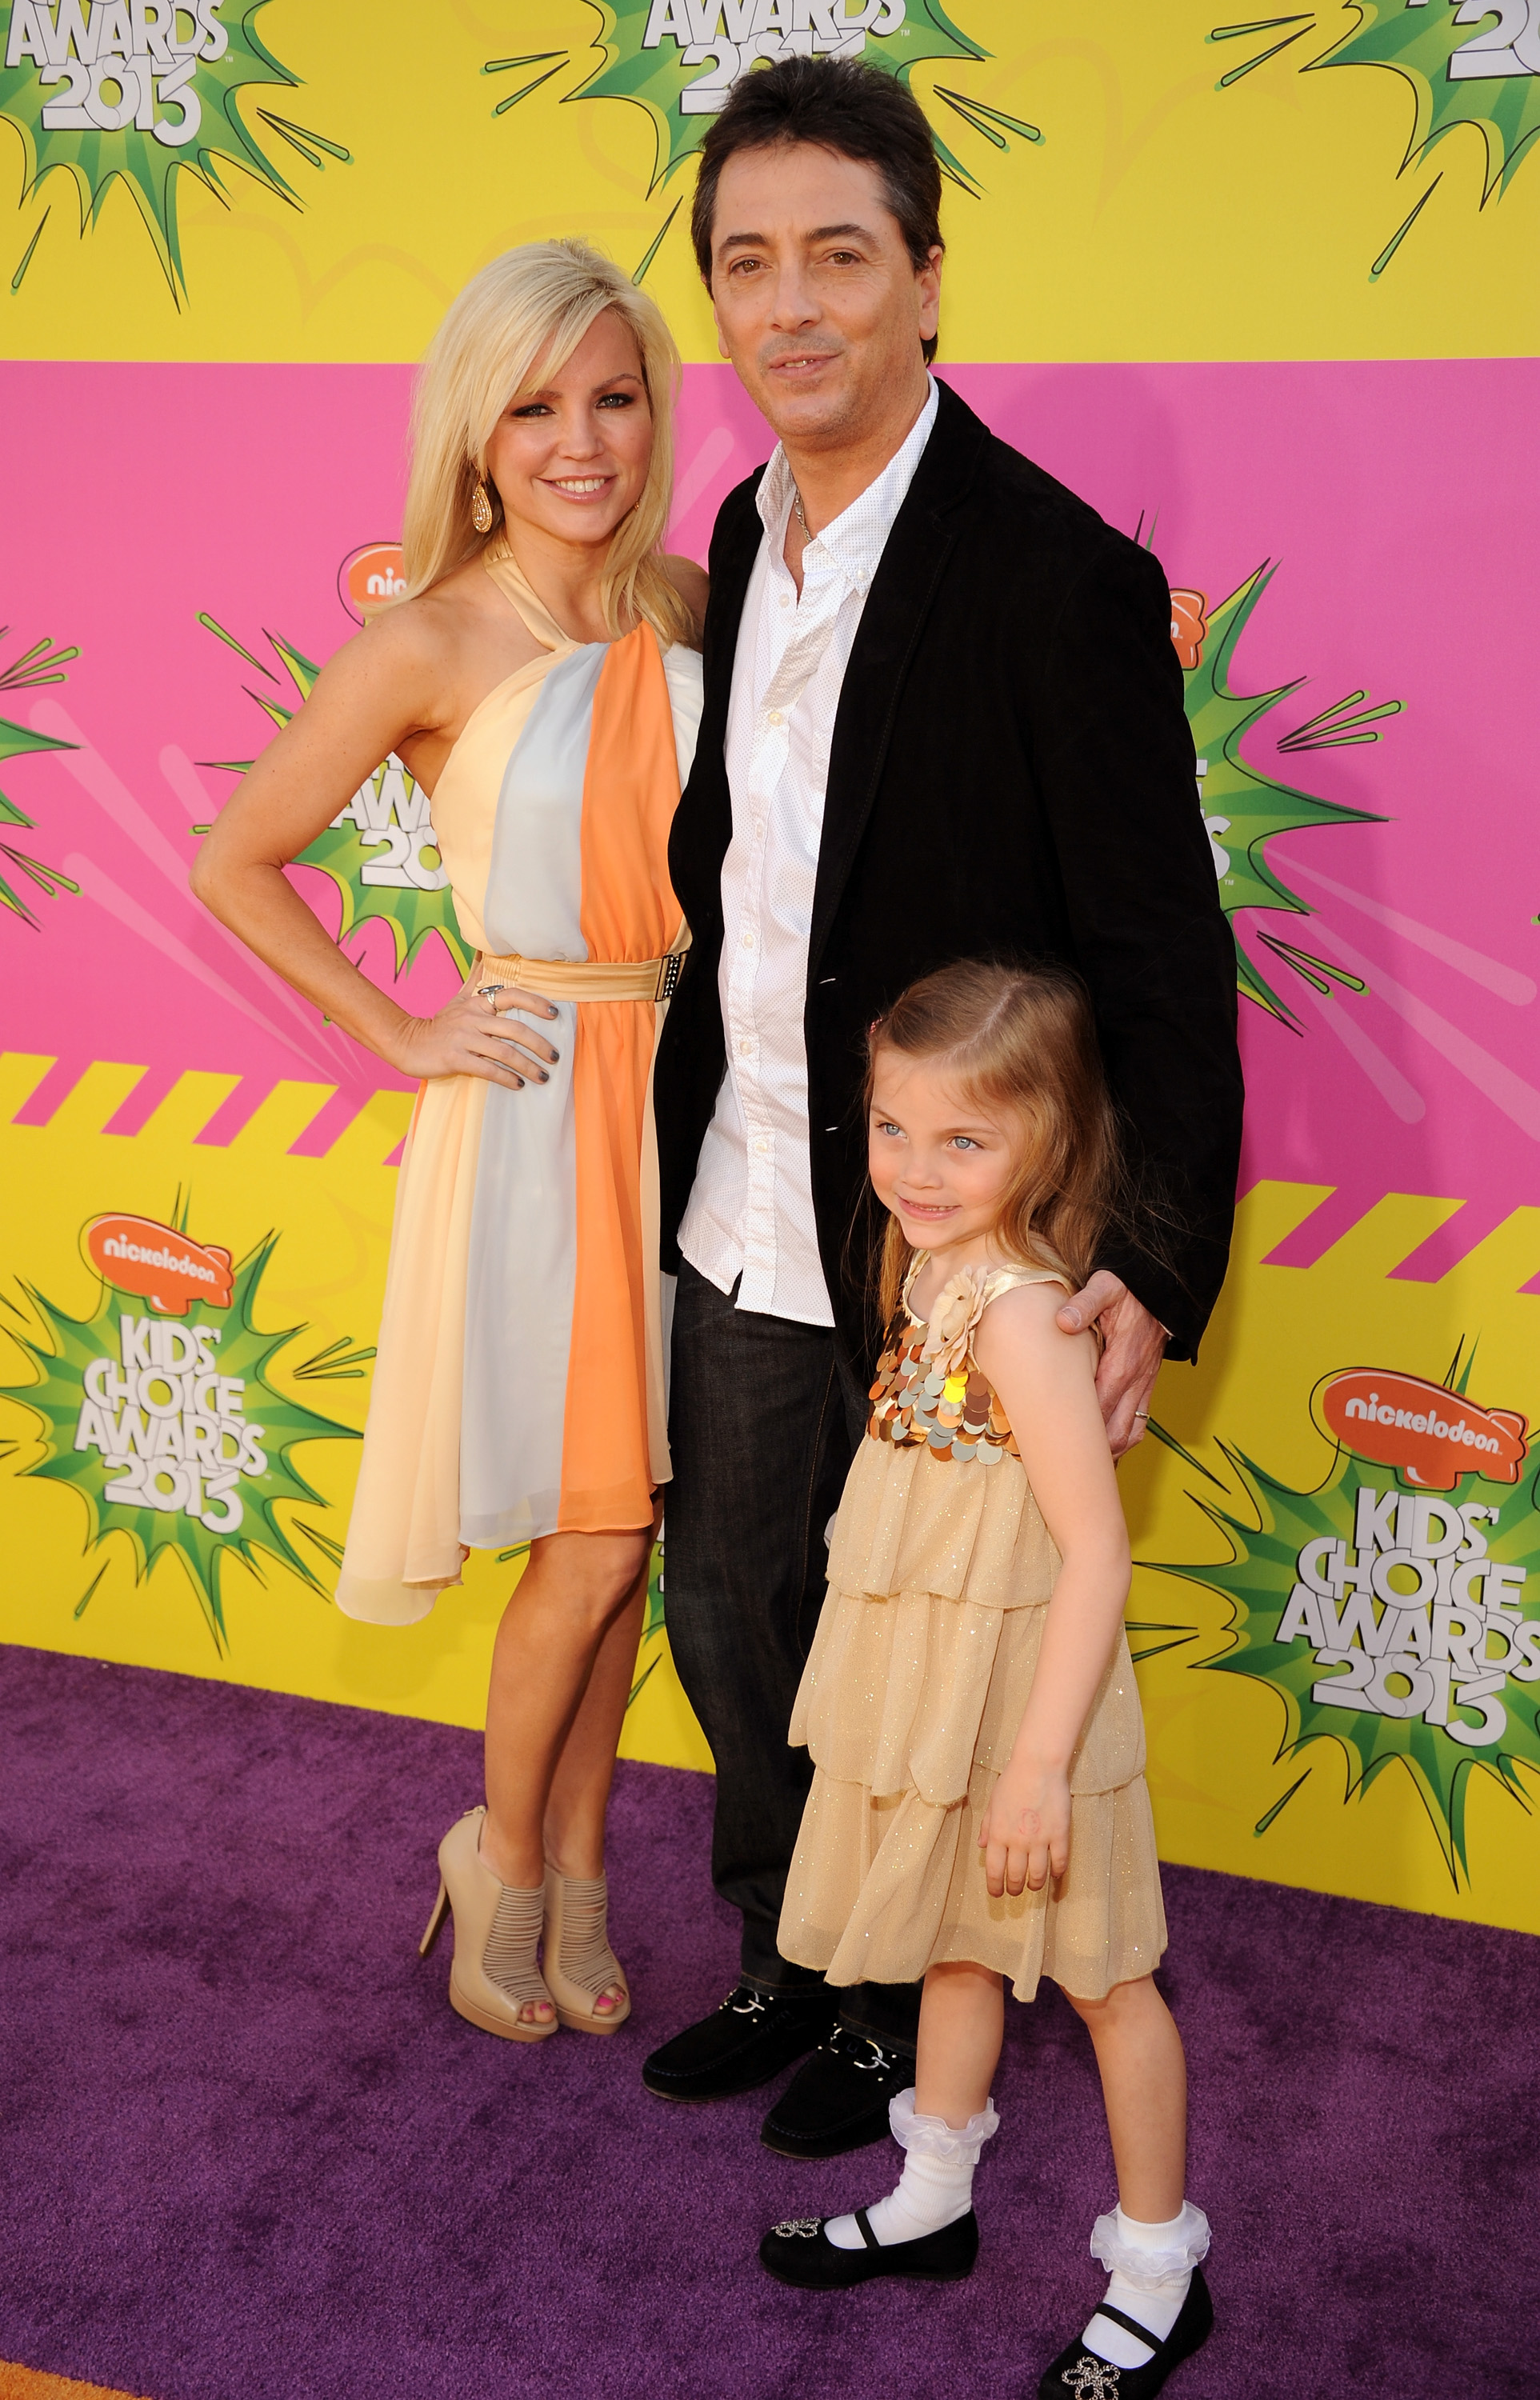 Scott Baio and Renee Sloan with their daughter Bailey in California in 2013 | Source: Getty Images